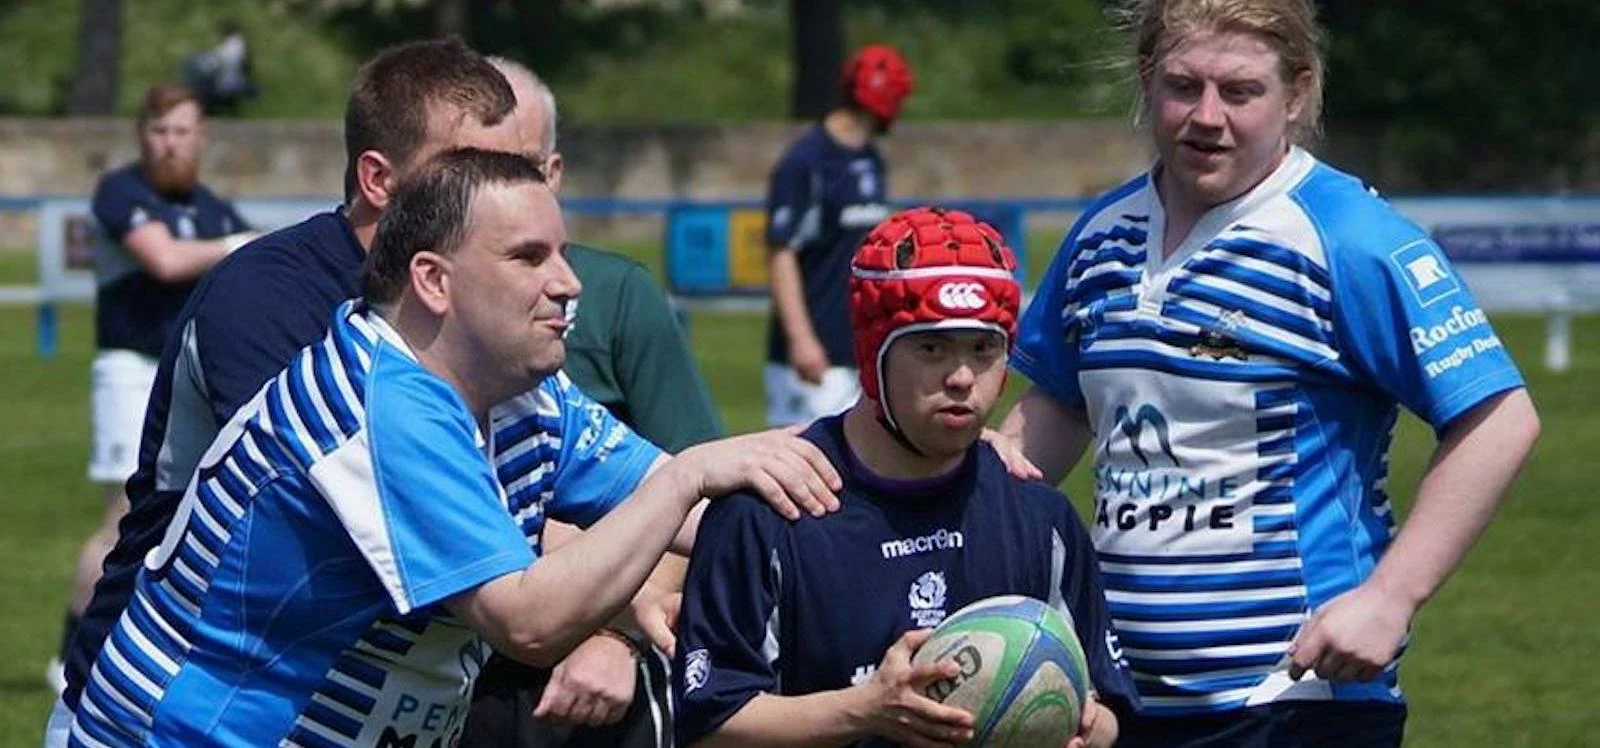 Mixed ability rugby